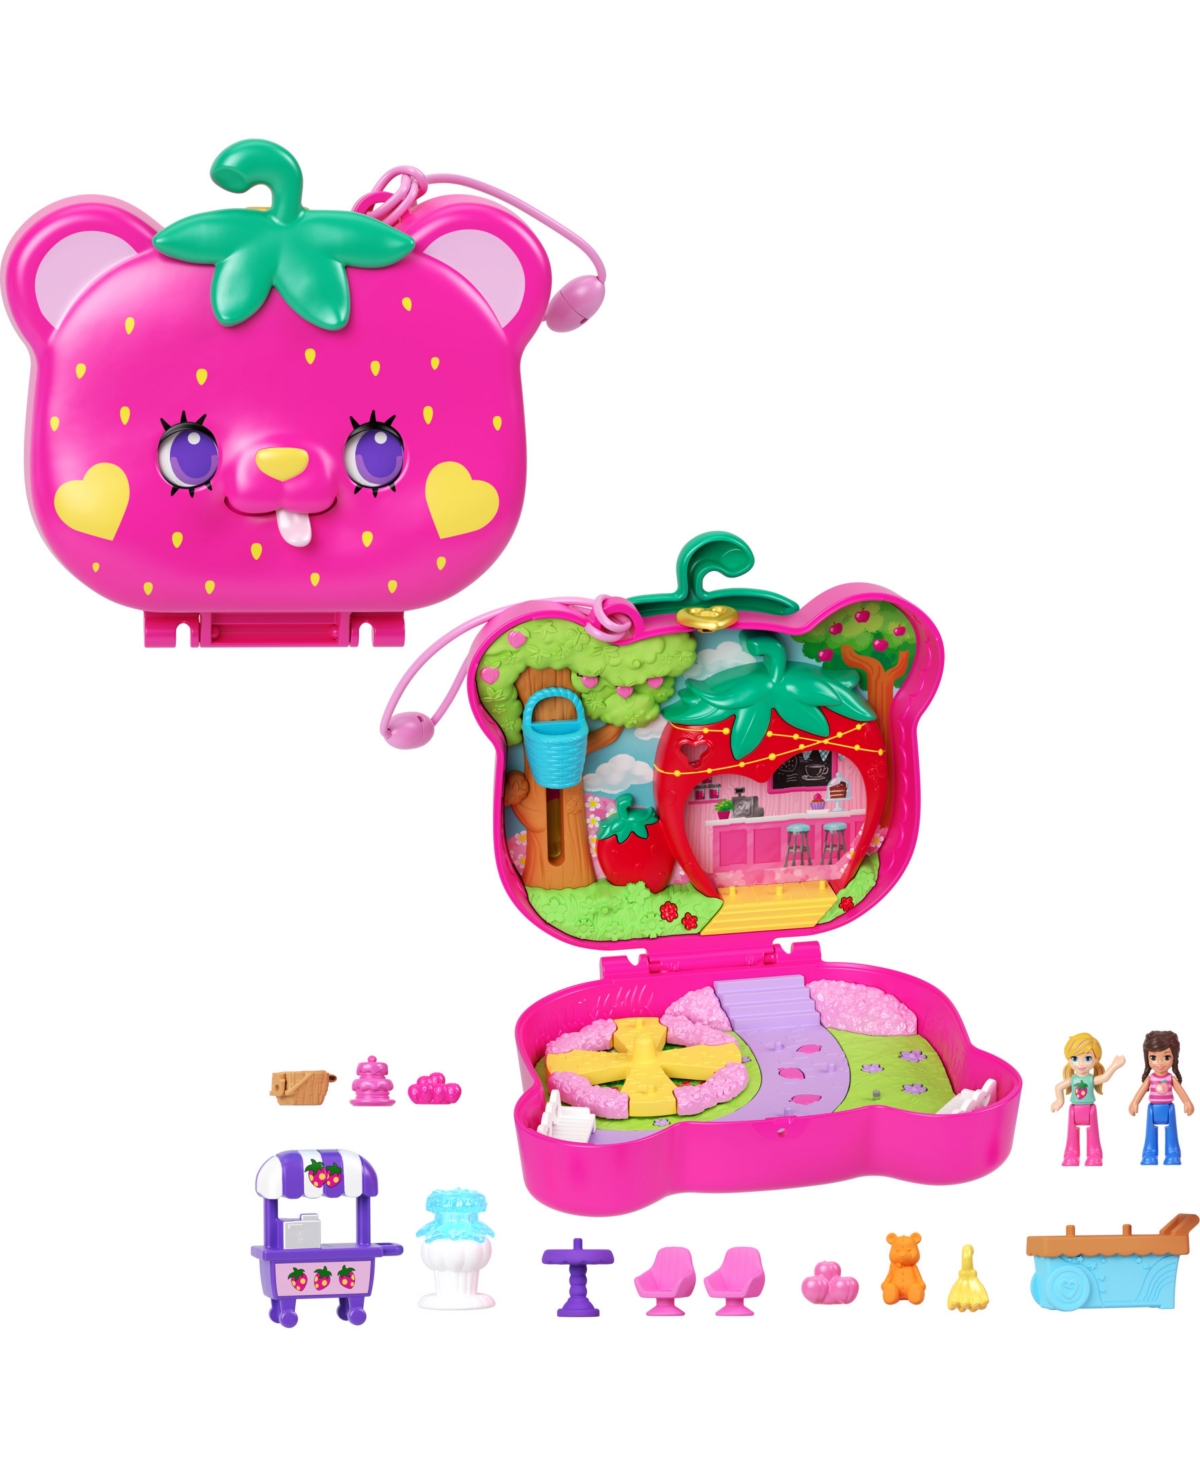 Polly Pocket Kids' Dolls And Playset, Travel Toys, Straw-beary Patch Compact In No Color